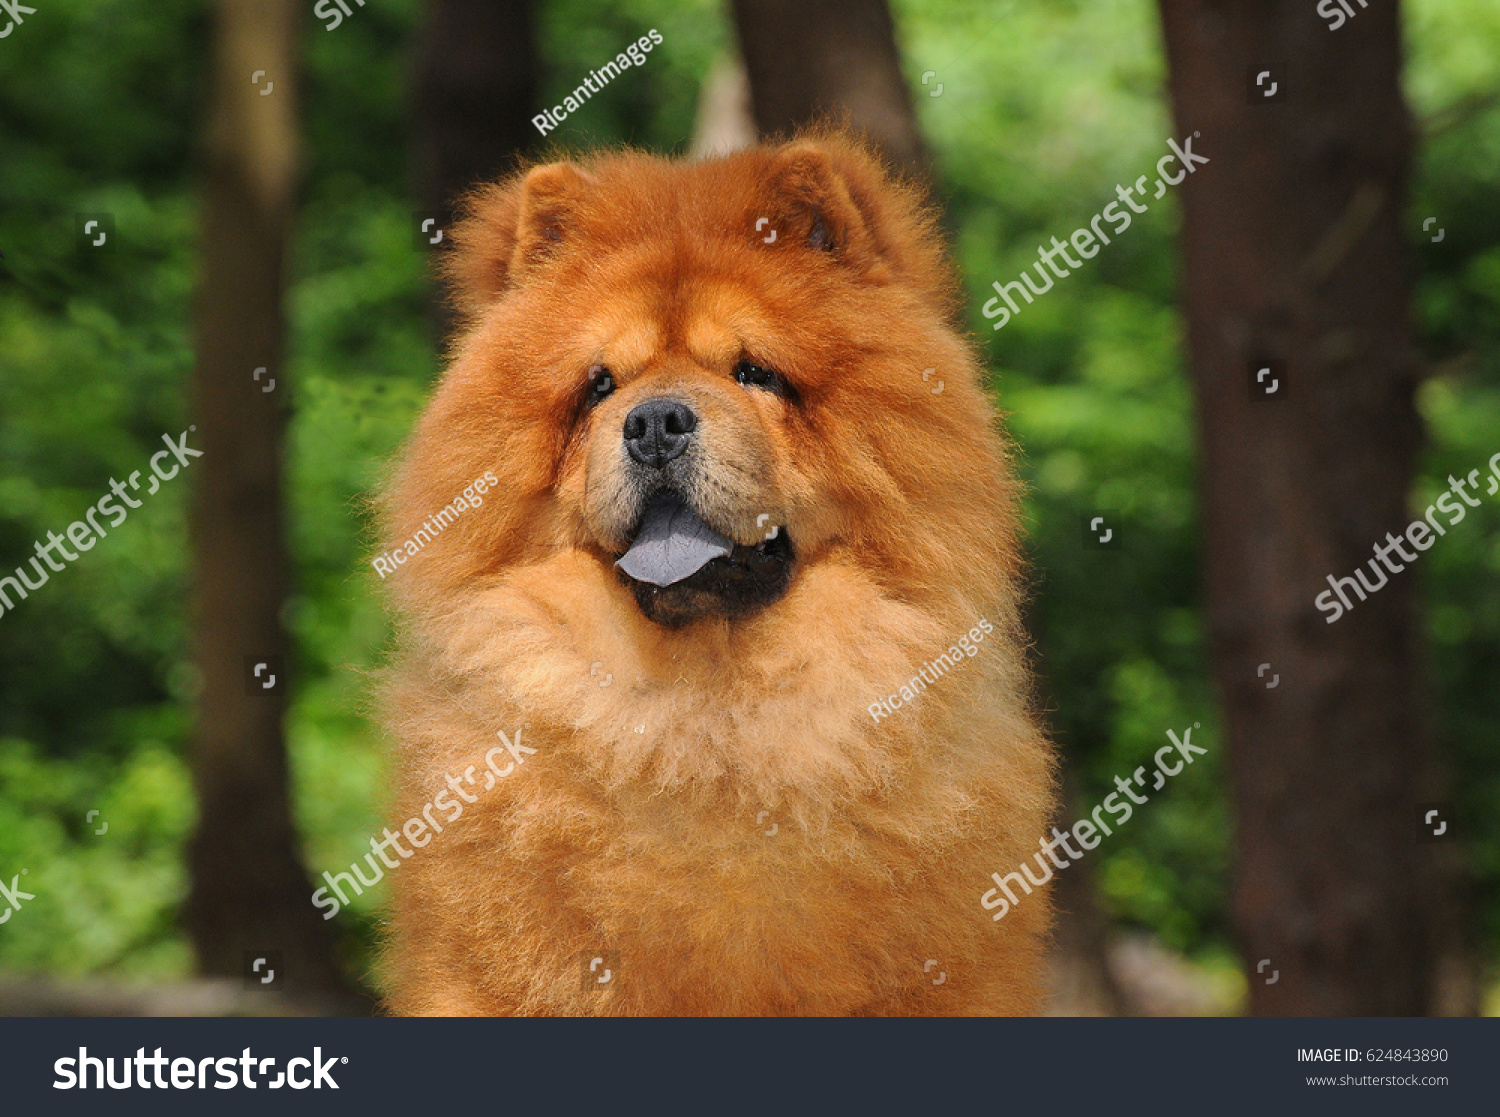 Portait of Chow Chow dog, Canis lupus familiaris. #624843890